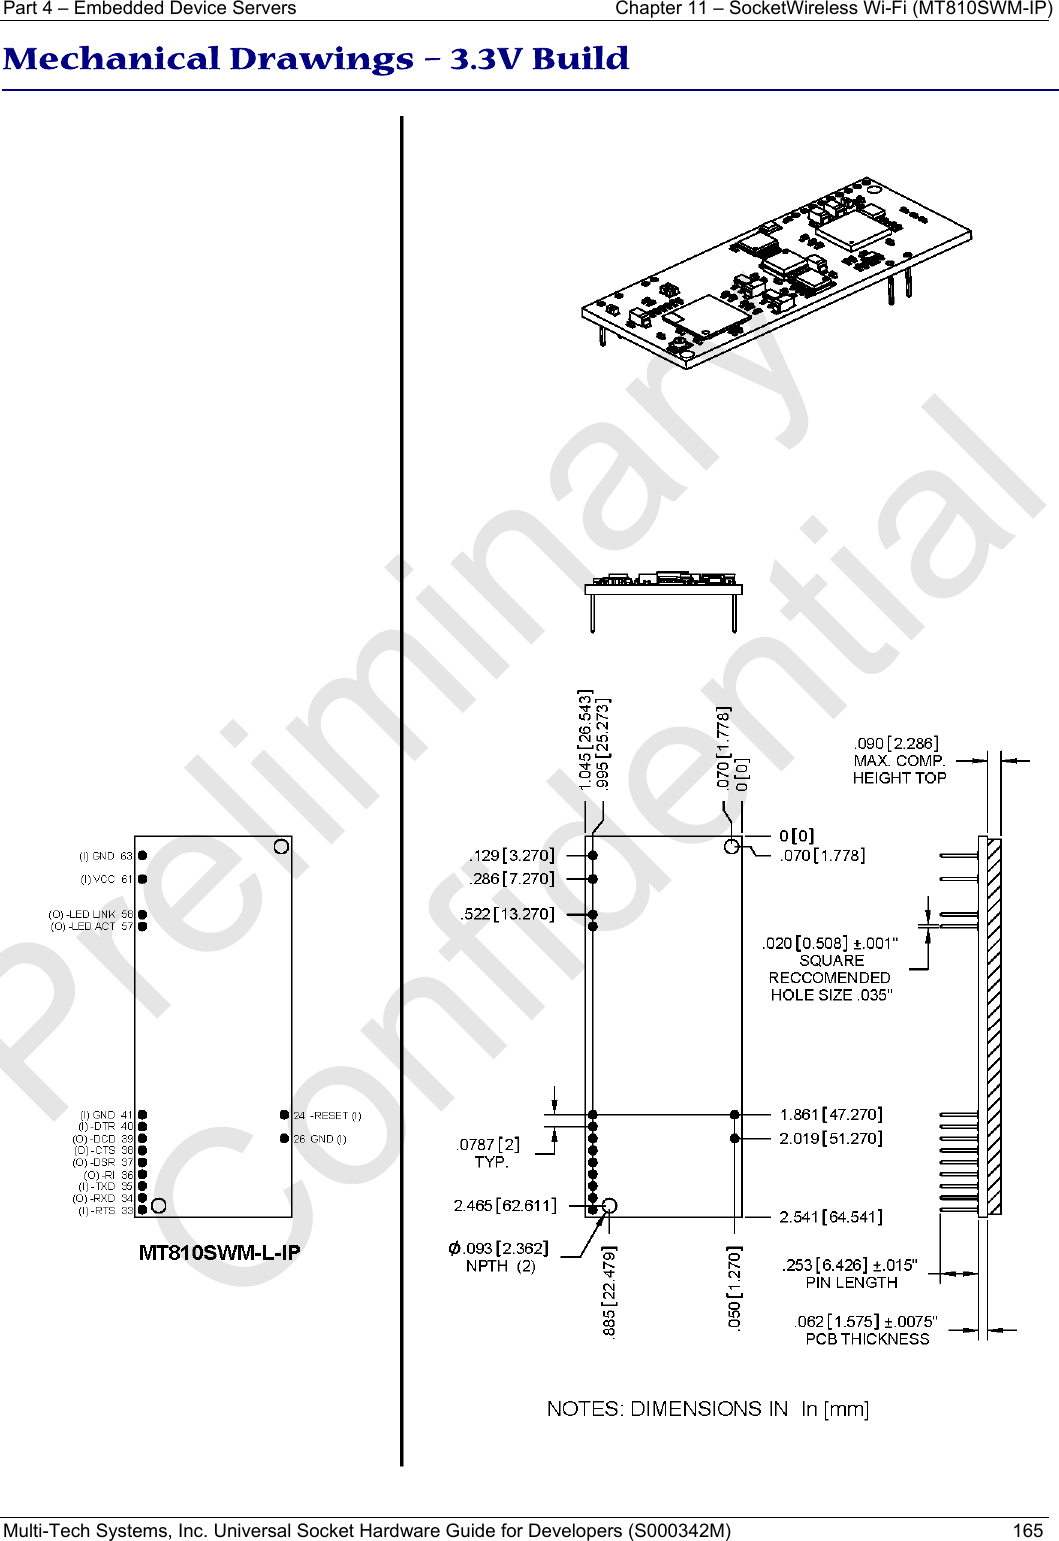 Part 4 – Embedded Device Servers  Chapter 11 – SocketWireless Wi-Fi (MT810SWM-IP) Multi-Tech Systems, Inc. Universal Socket Hardware Guide for Developers (S000342M)  165  Mechanical Drawings – 3.3V Build  Preliminary  Confidential